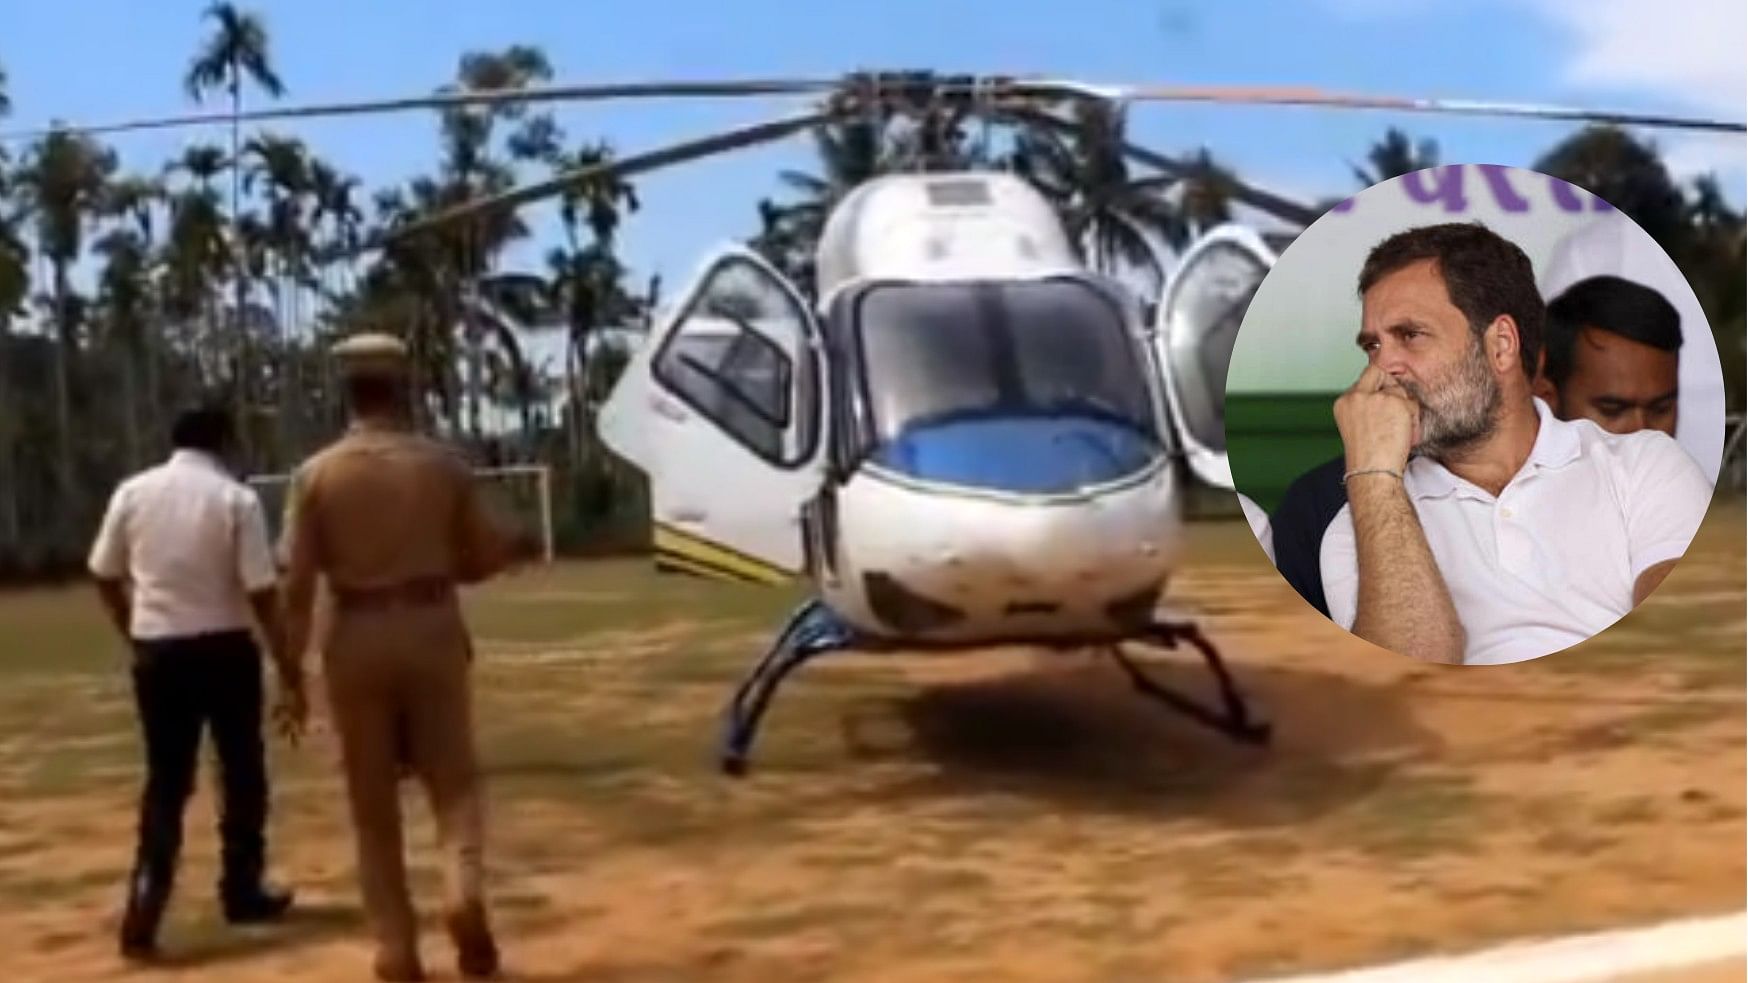 <div class="paragraphs"><p>Election officials on their way to check Rahul Gandhi's helicopter, Rahul Gandhi.</p></div>